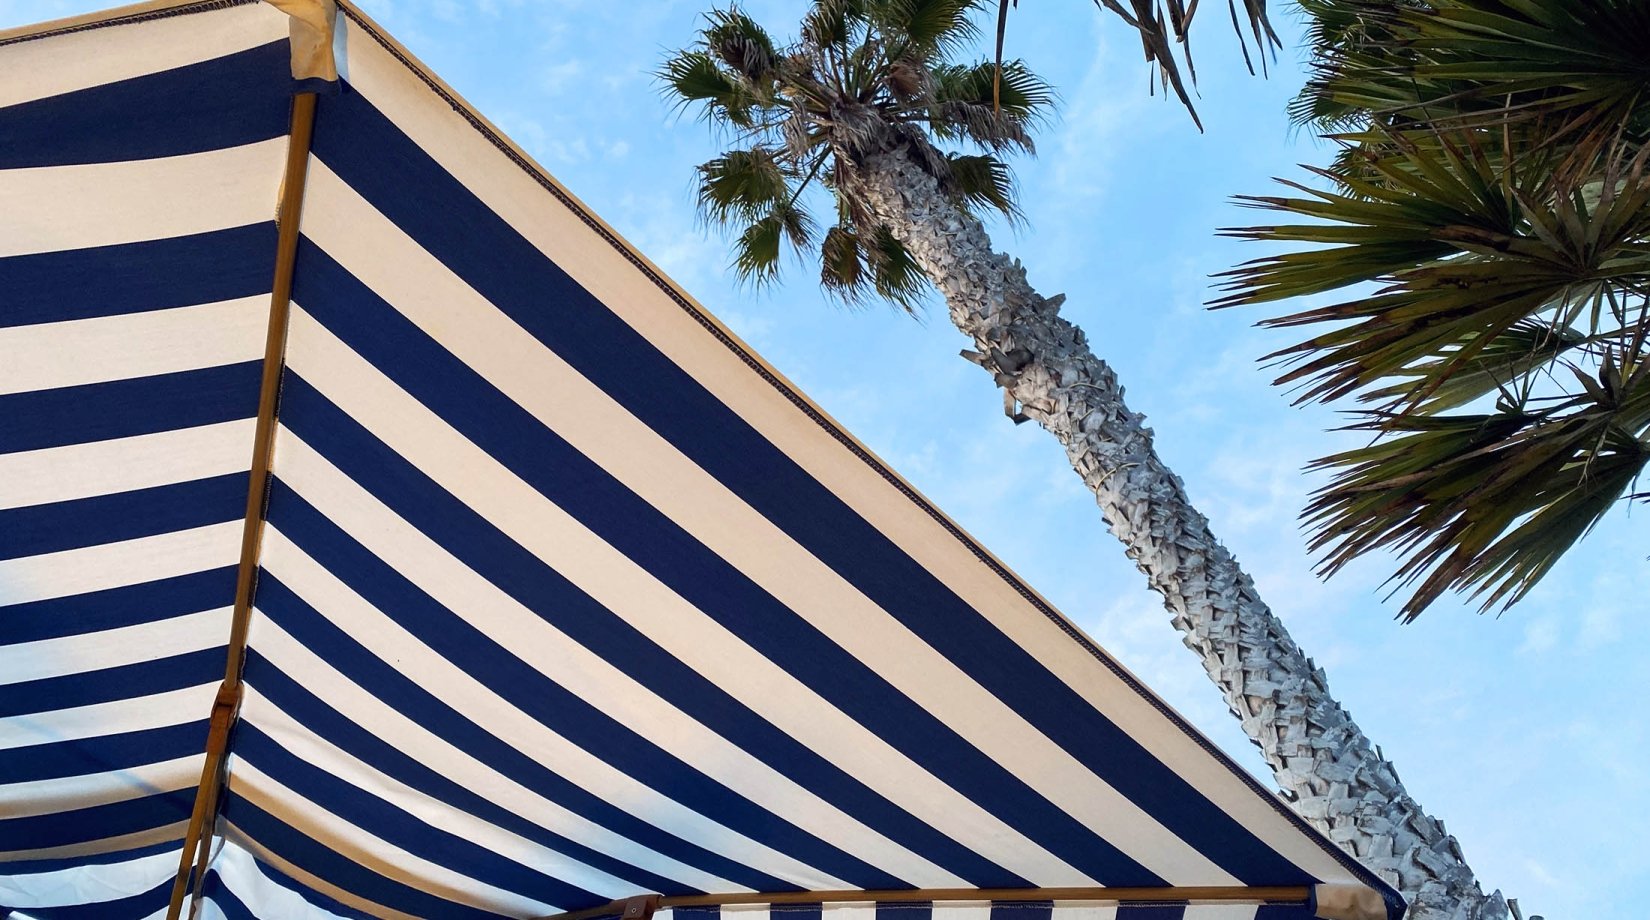 A large beach umbrella seen from below with blue and white stripes under palm trees in the afternoon